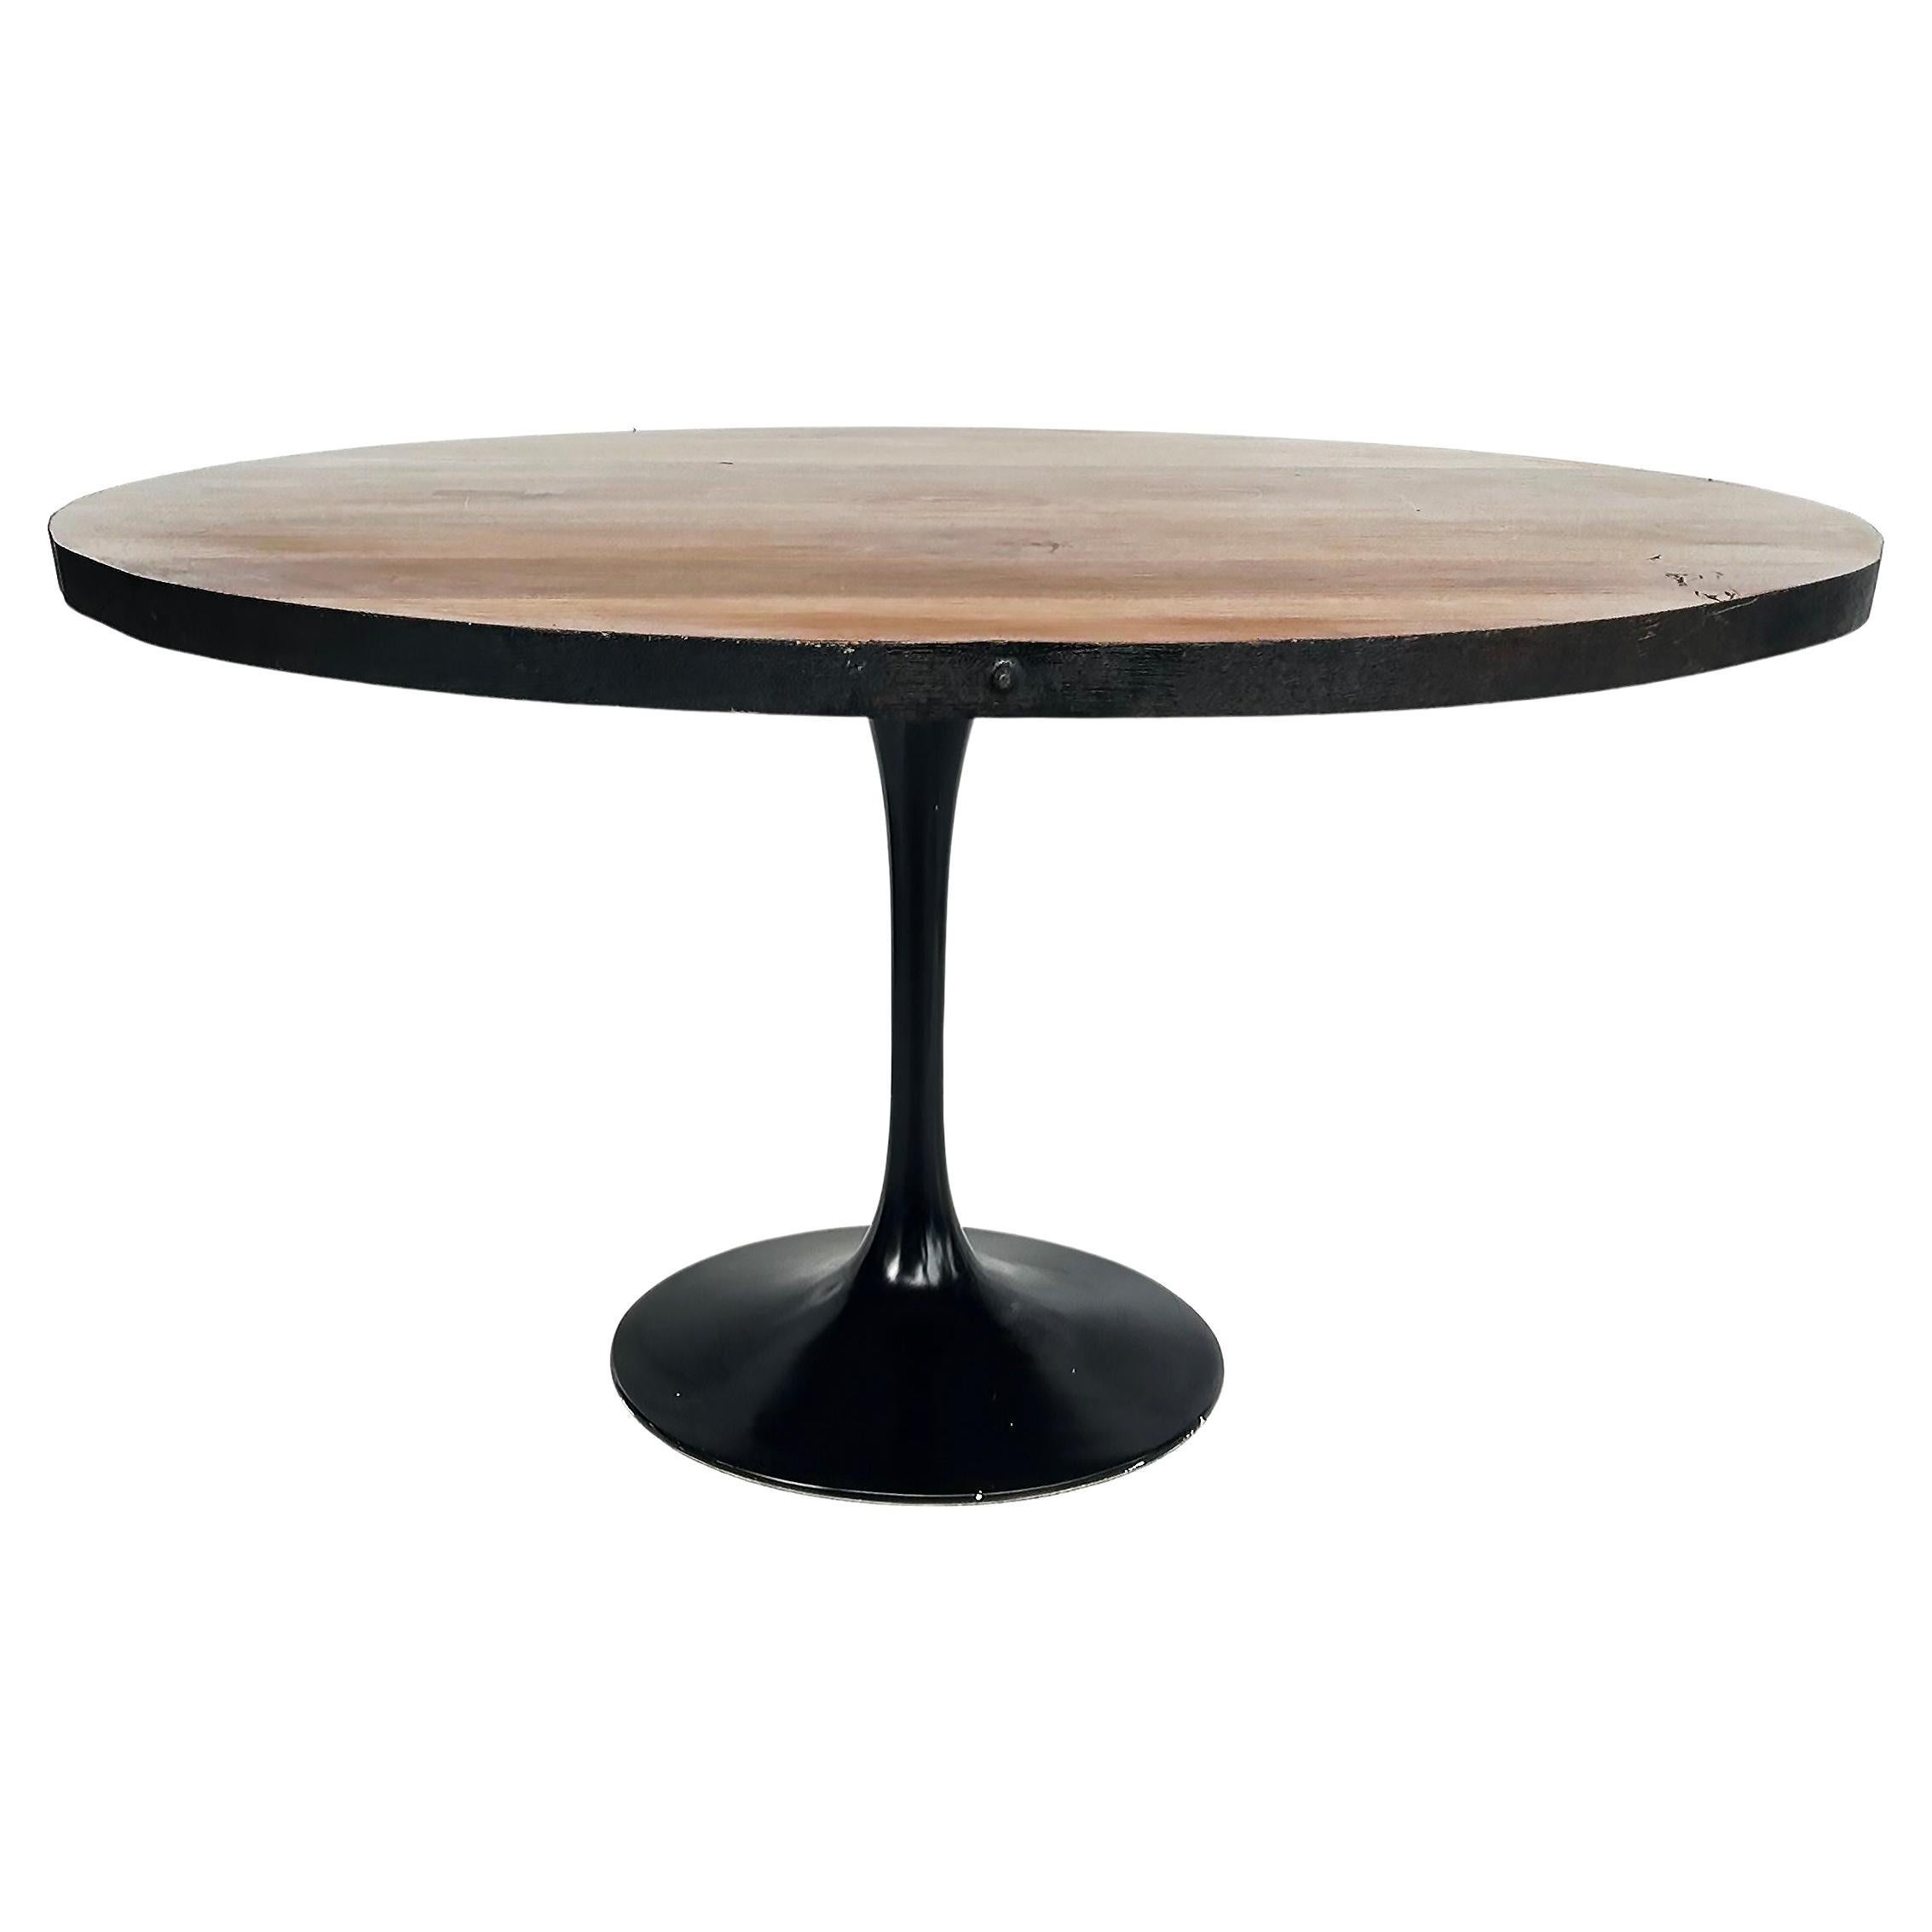 Organic Modern Industrial Tulip Dining Table with Recycled Wood Top For Sale